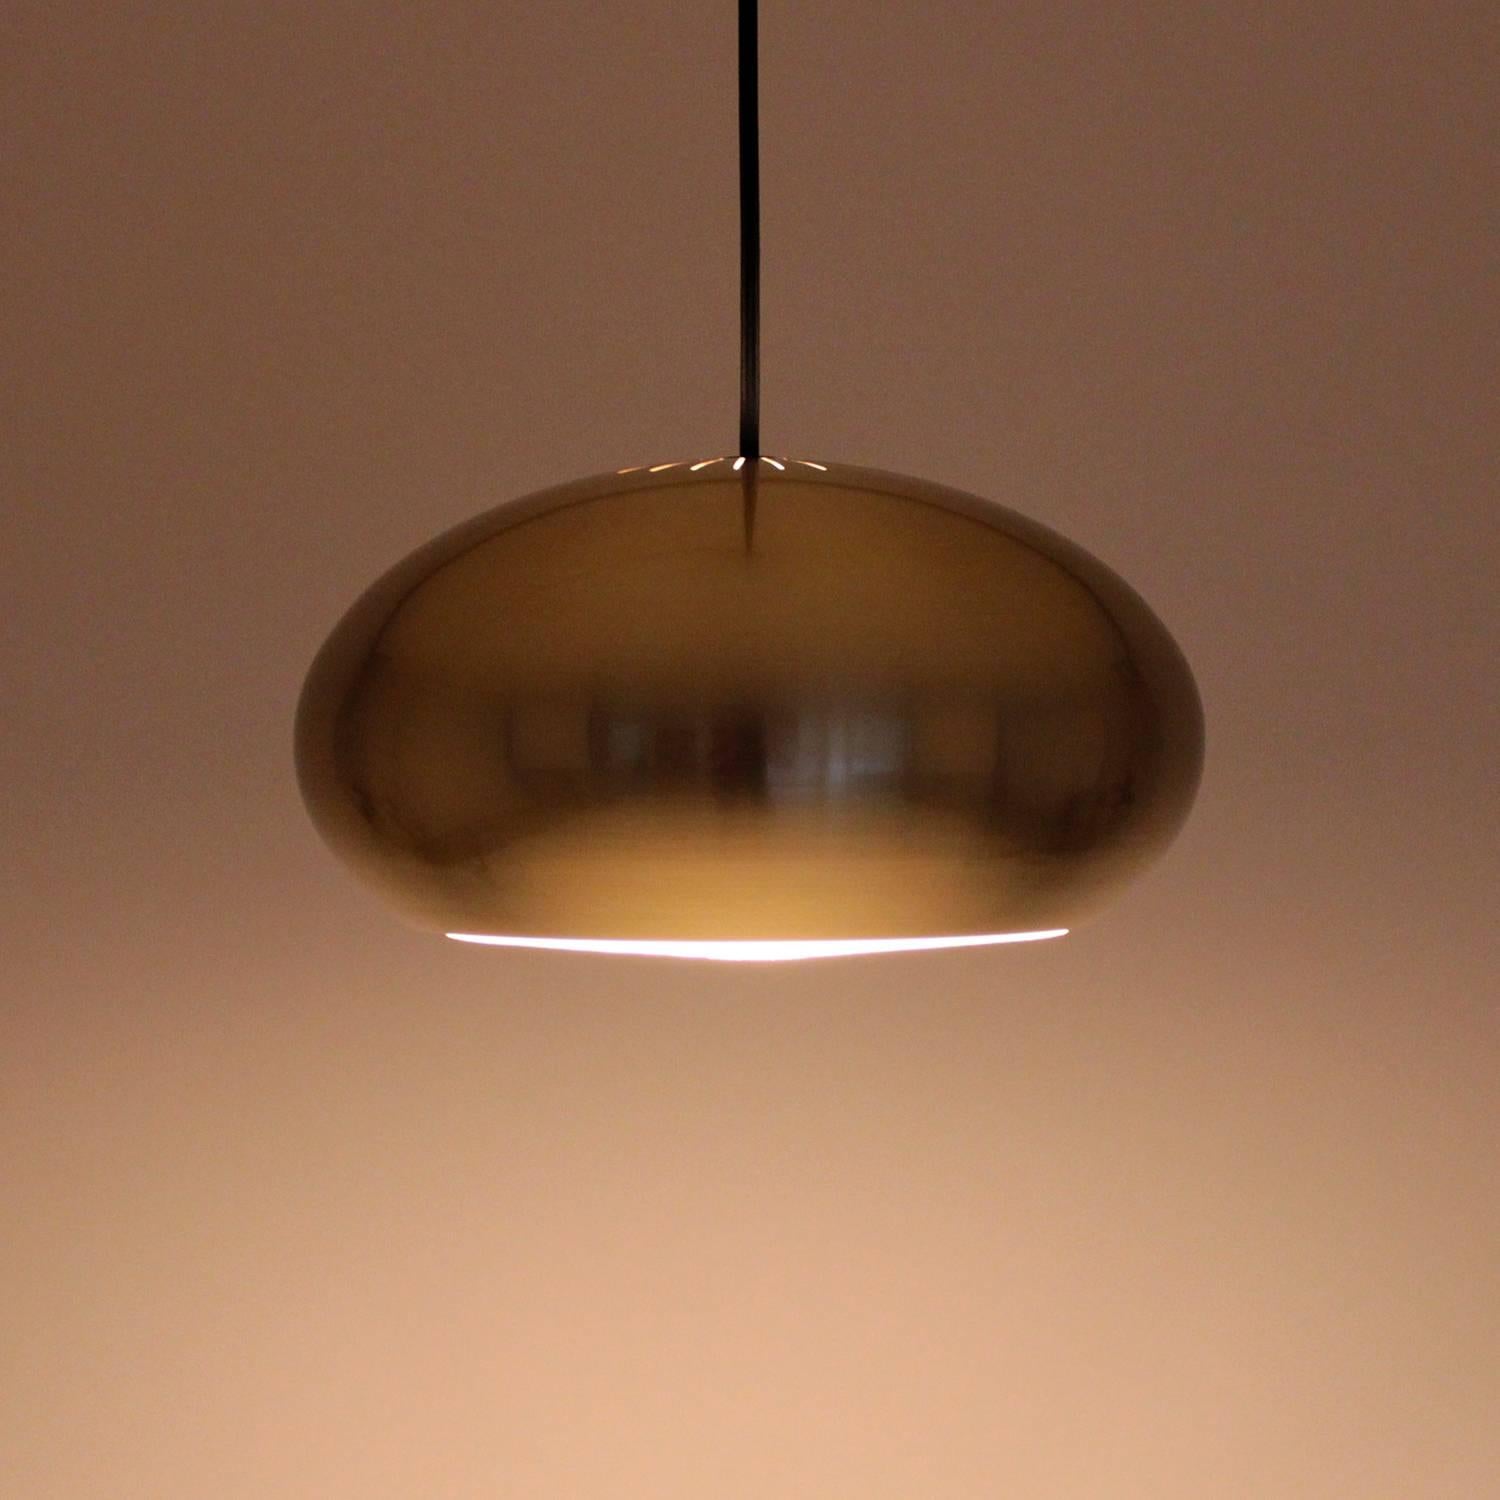 Medio, brass pendant light by Jo Hammerborg in 1966 for Fog & Mørup - gorgeous space age design in RARE near mint vintage condition!

A space age design piece with attractive dome shape and beautiful glistening brass surface. The inside features a